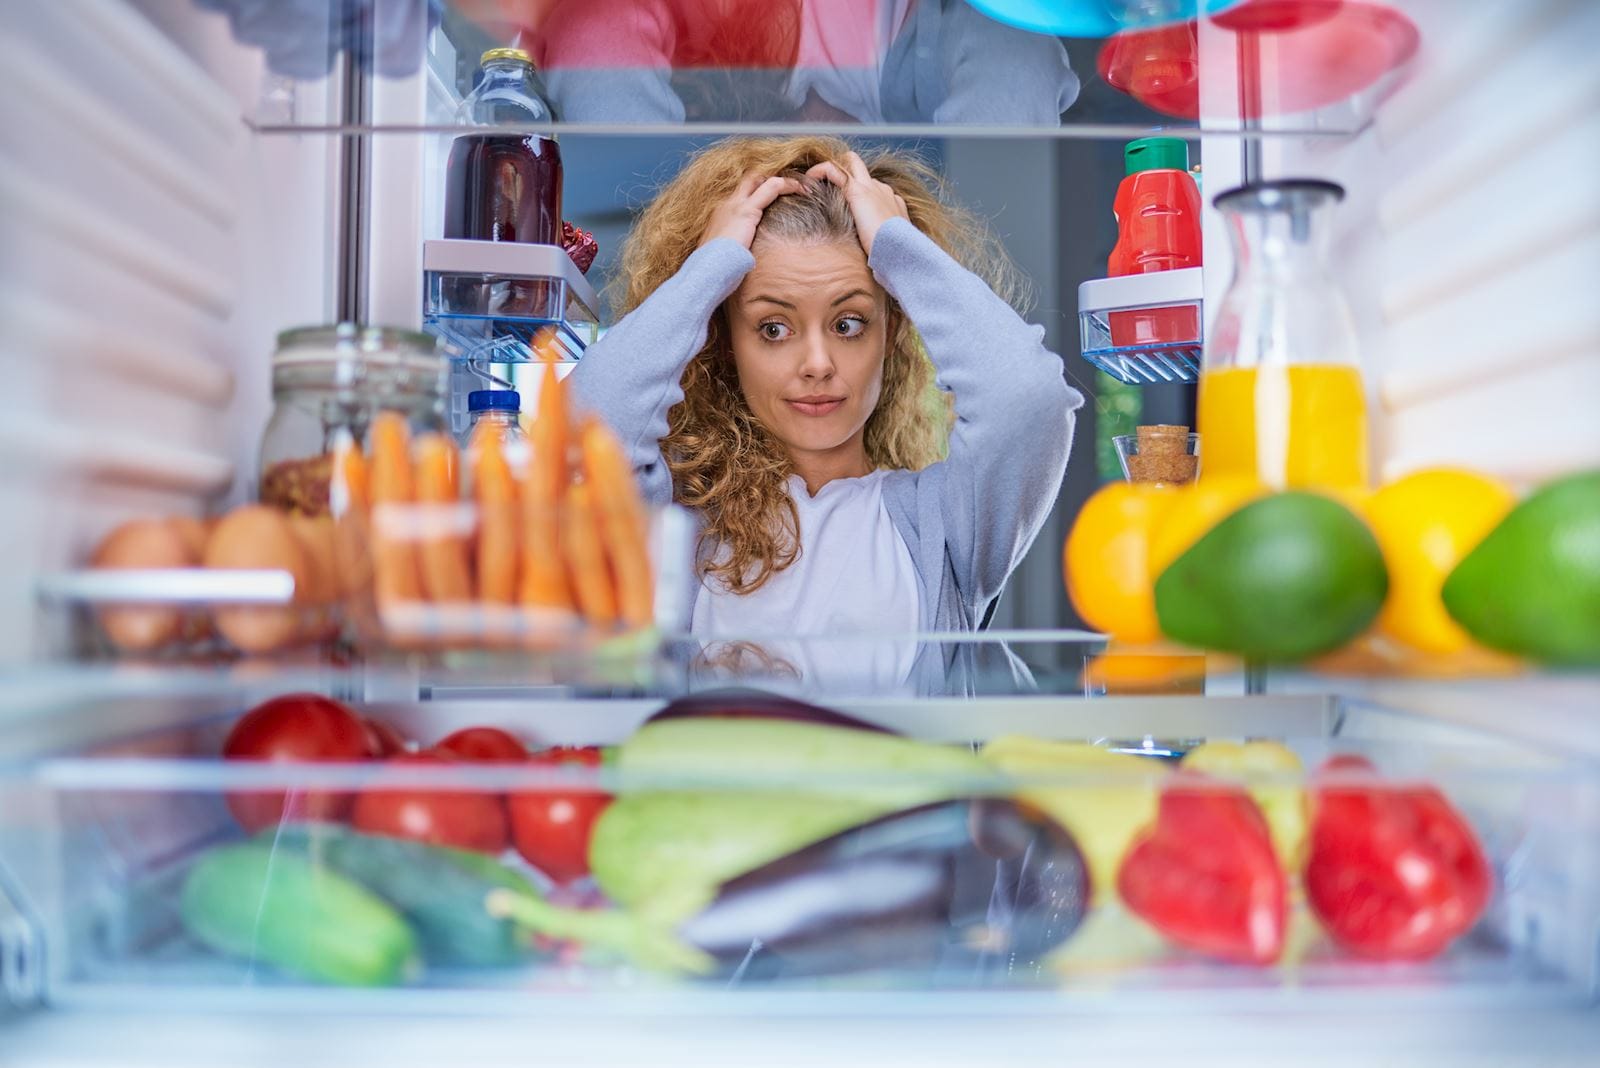 woman looks into fridge stressed with hands on her head